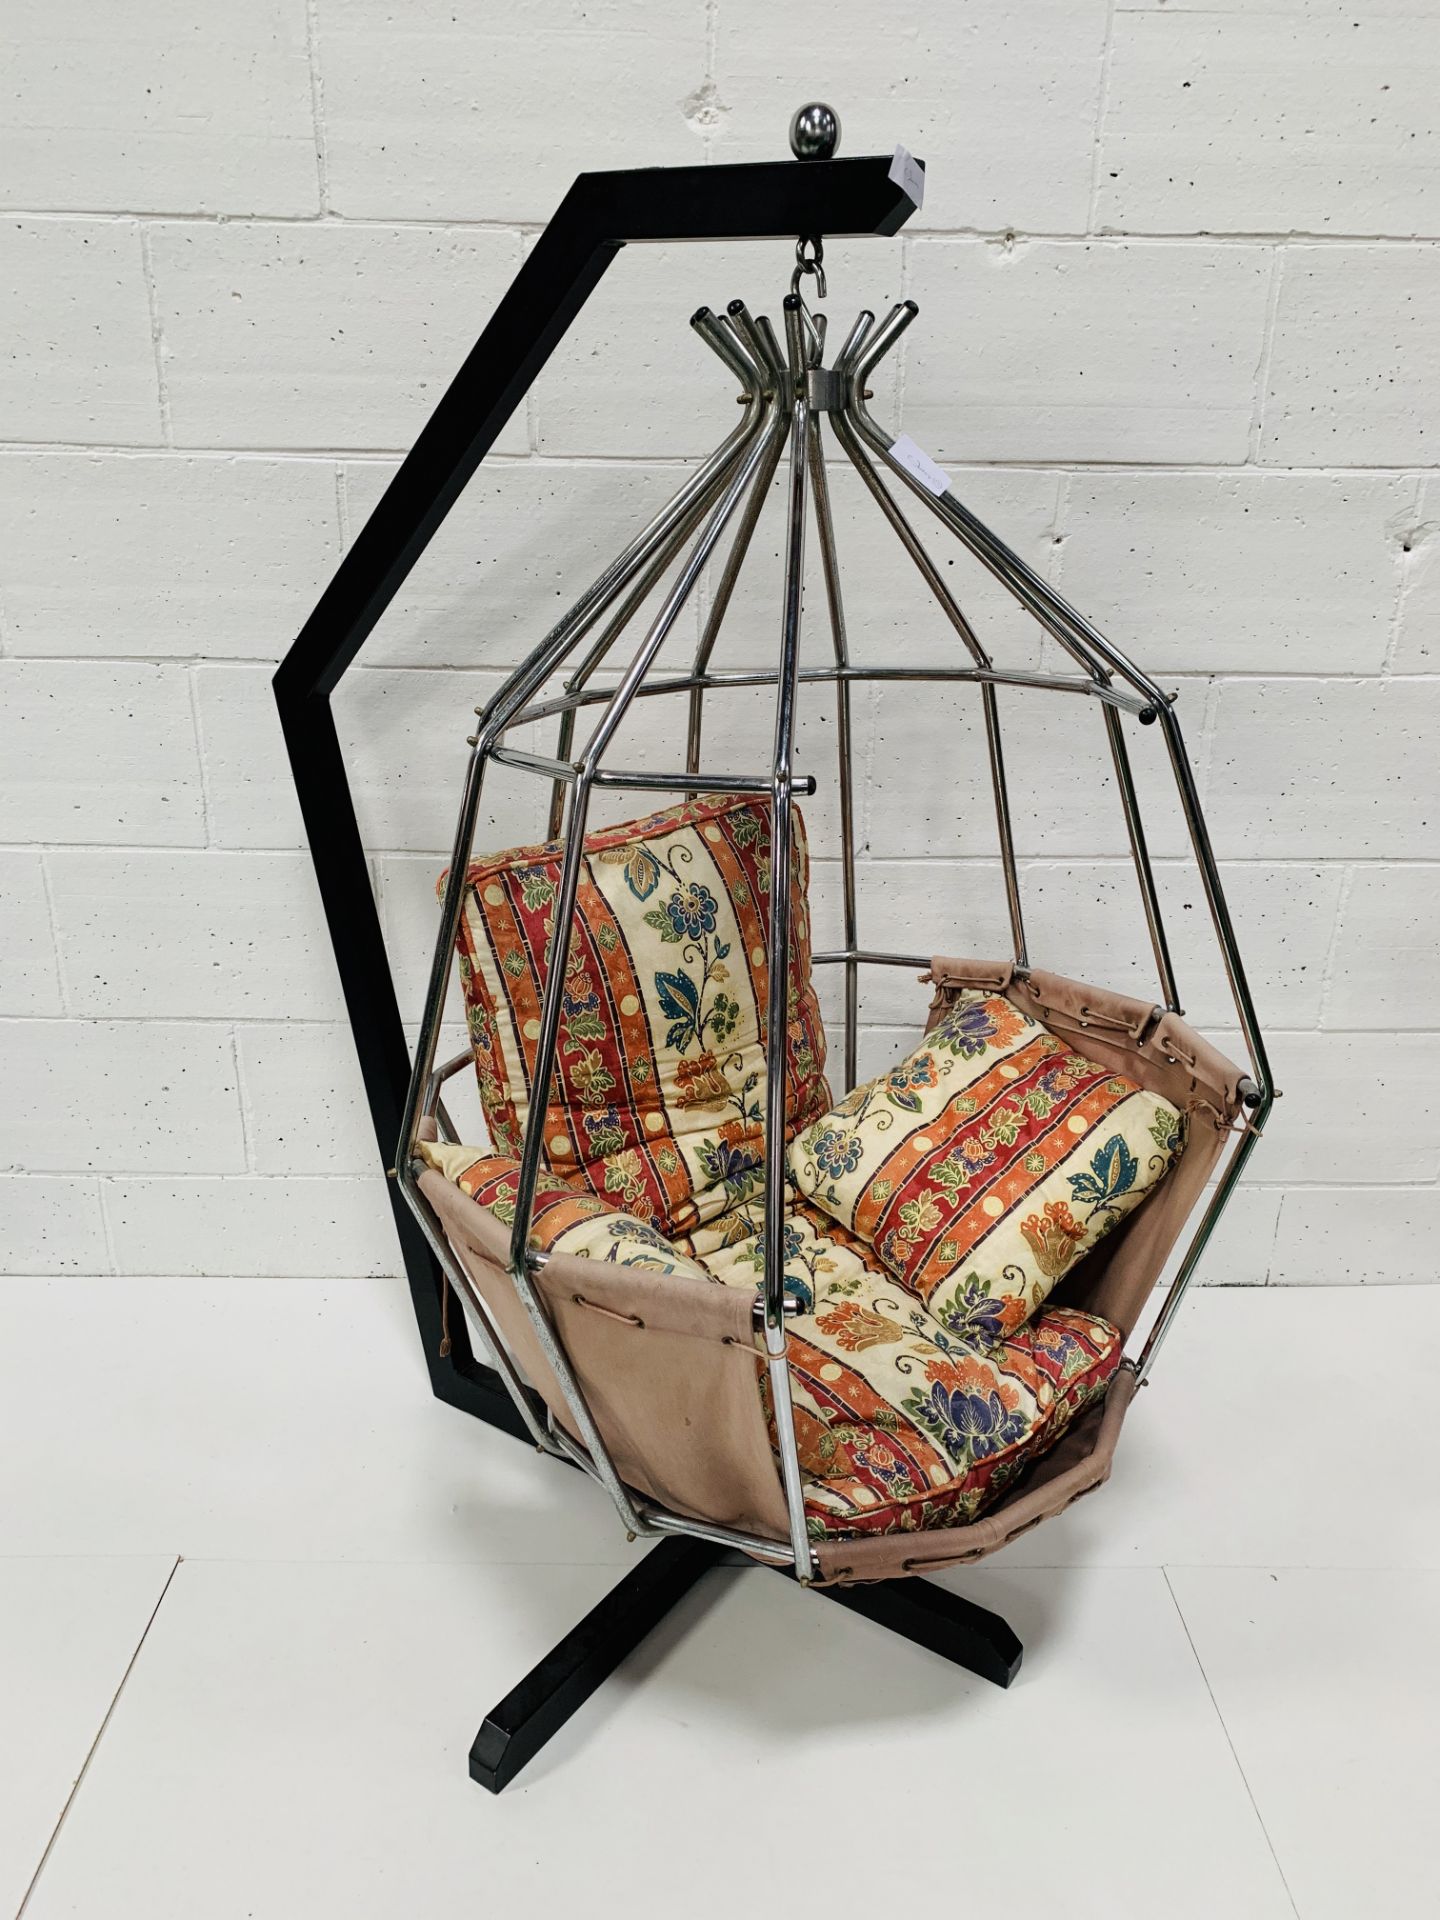 1960's / 70's I B Arberg chrome and fabric "Parrot" chair.